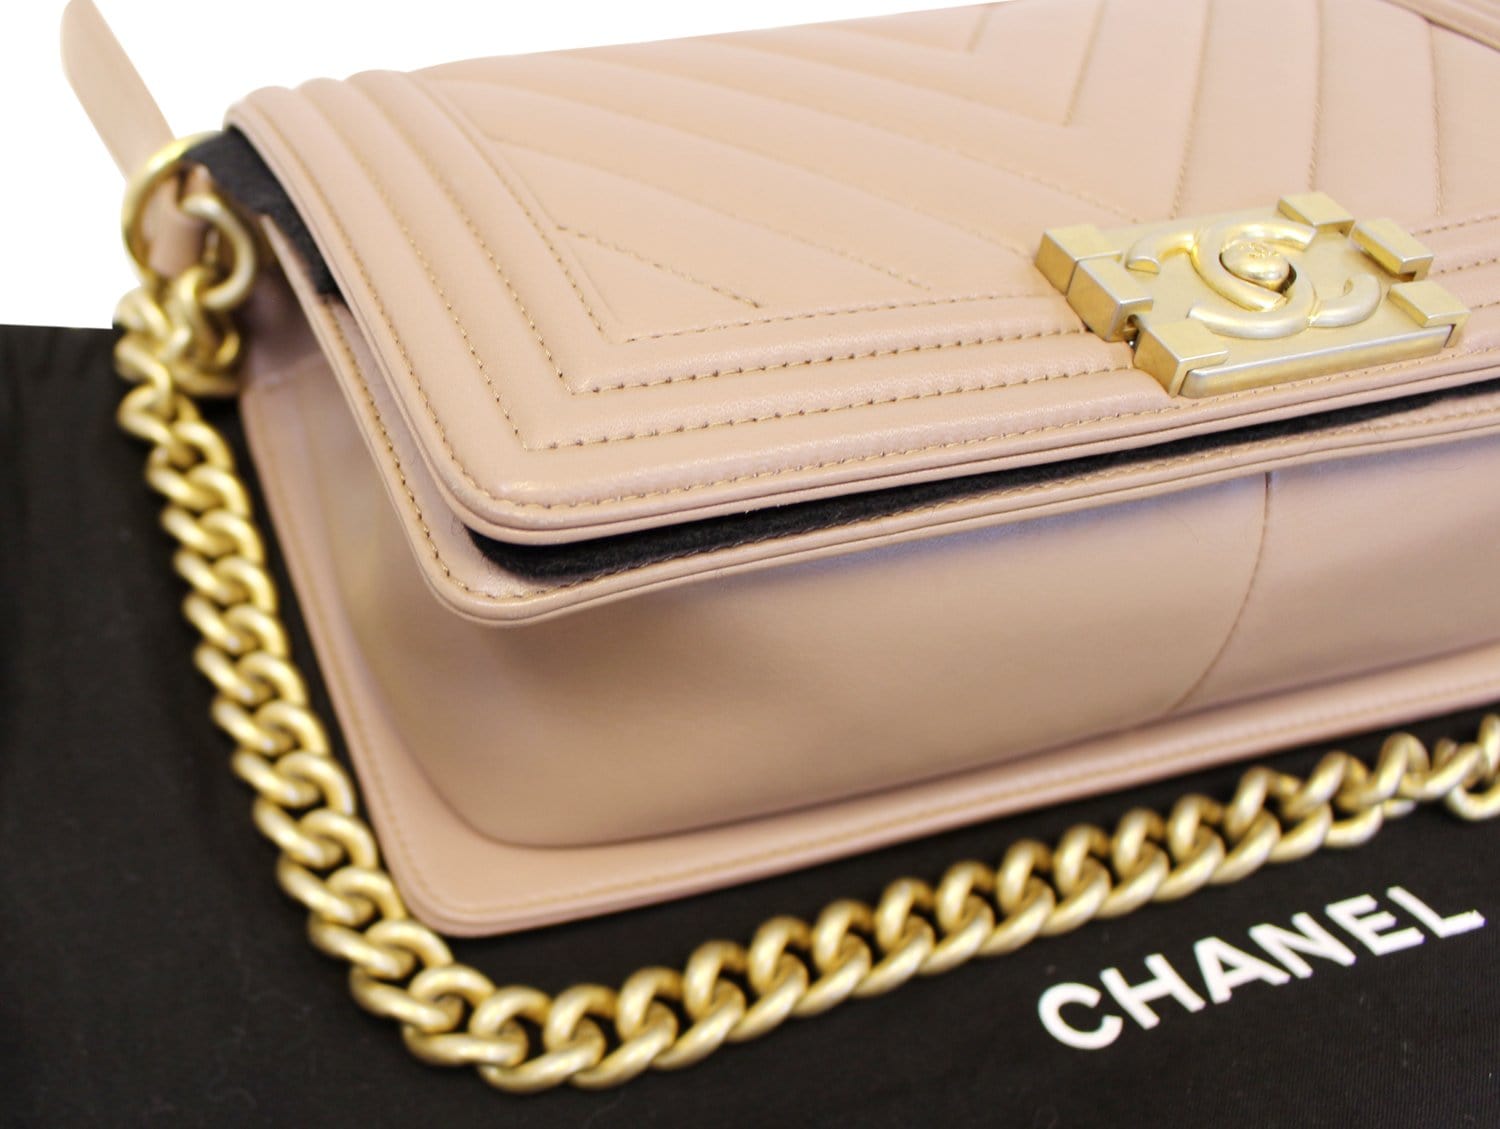 Chanel Cream Quilted Leather Medium Boy Flap Bag Chanel | The Luxury Closet